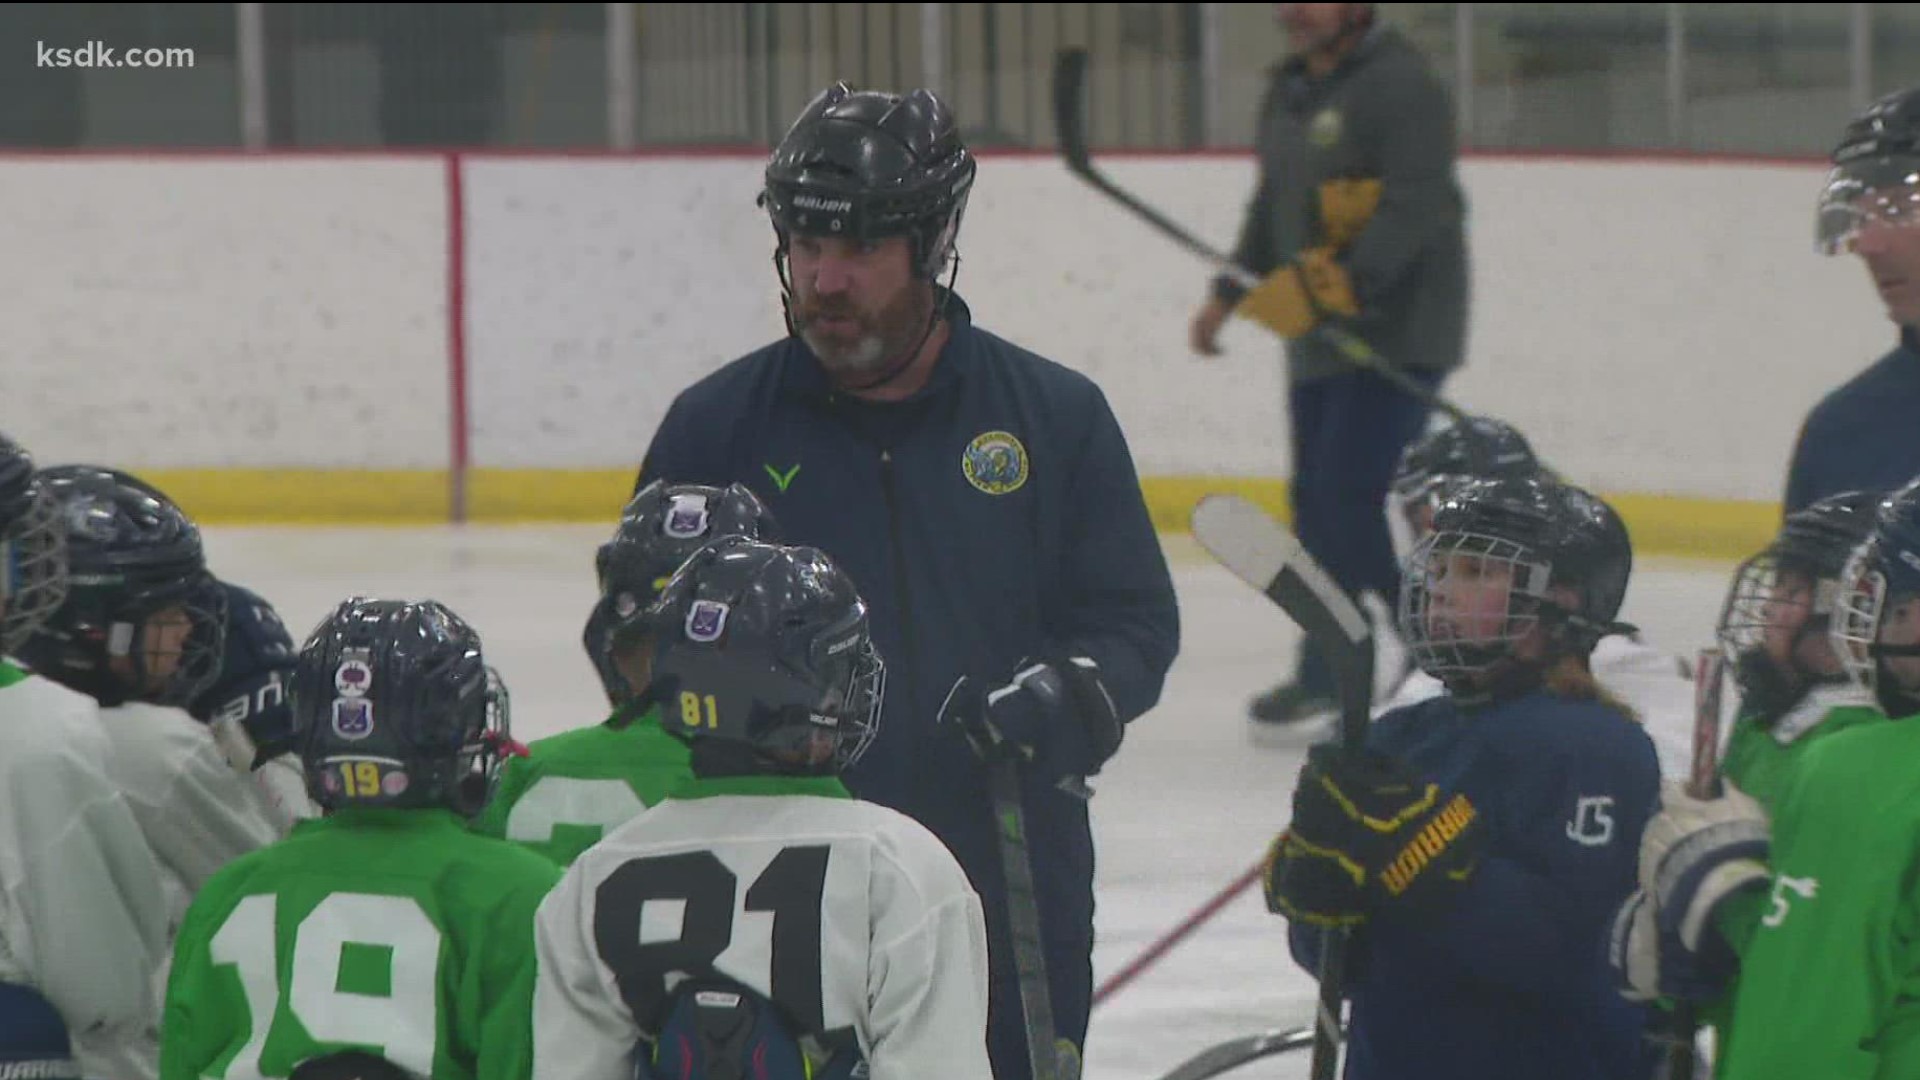 The attitude of the Sting is shaped long before game day. The commitment begins in practice with drills, skating, shooting and doing it repetitiously.